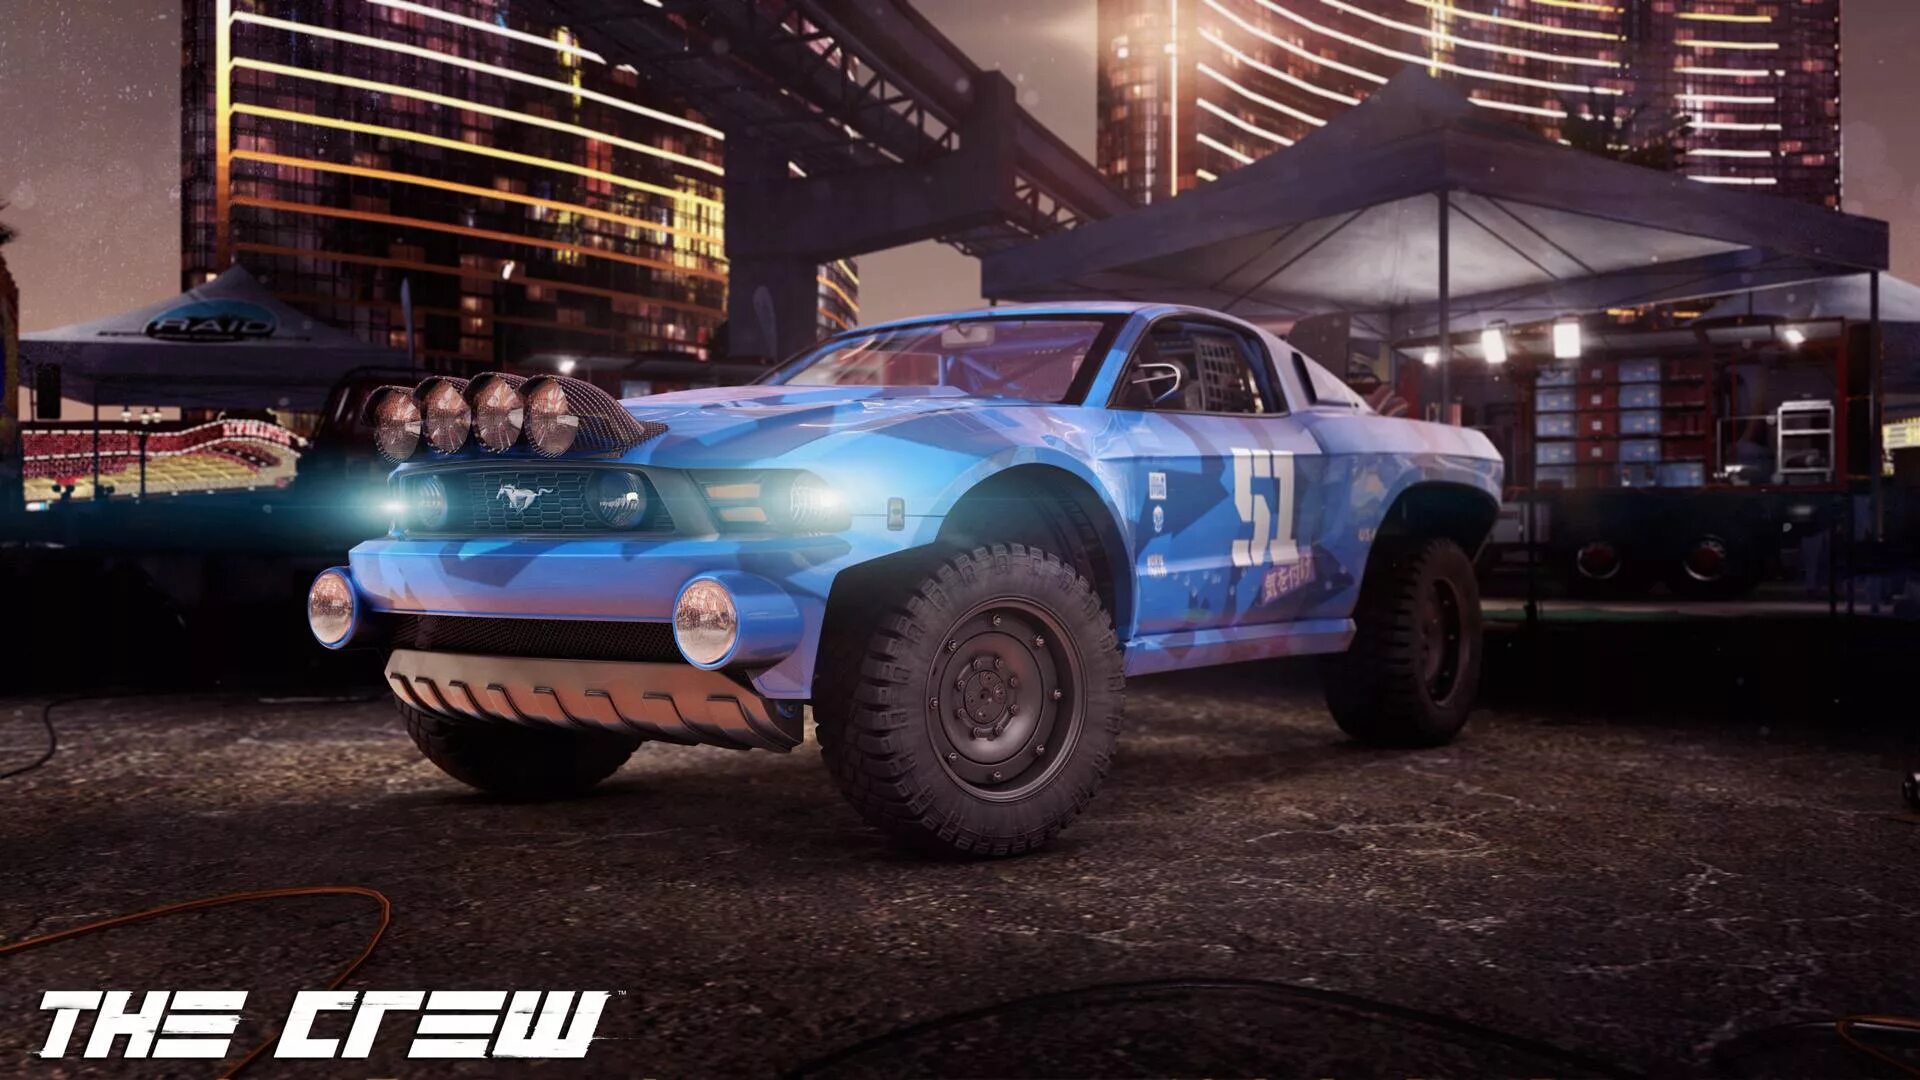 The crew movie. Форд Мустанг из the Crew. Форд Мустанг off Road. The Crew Ford Mustang 2011. The Crew 2014.